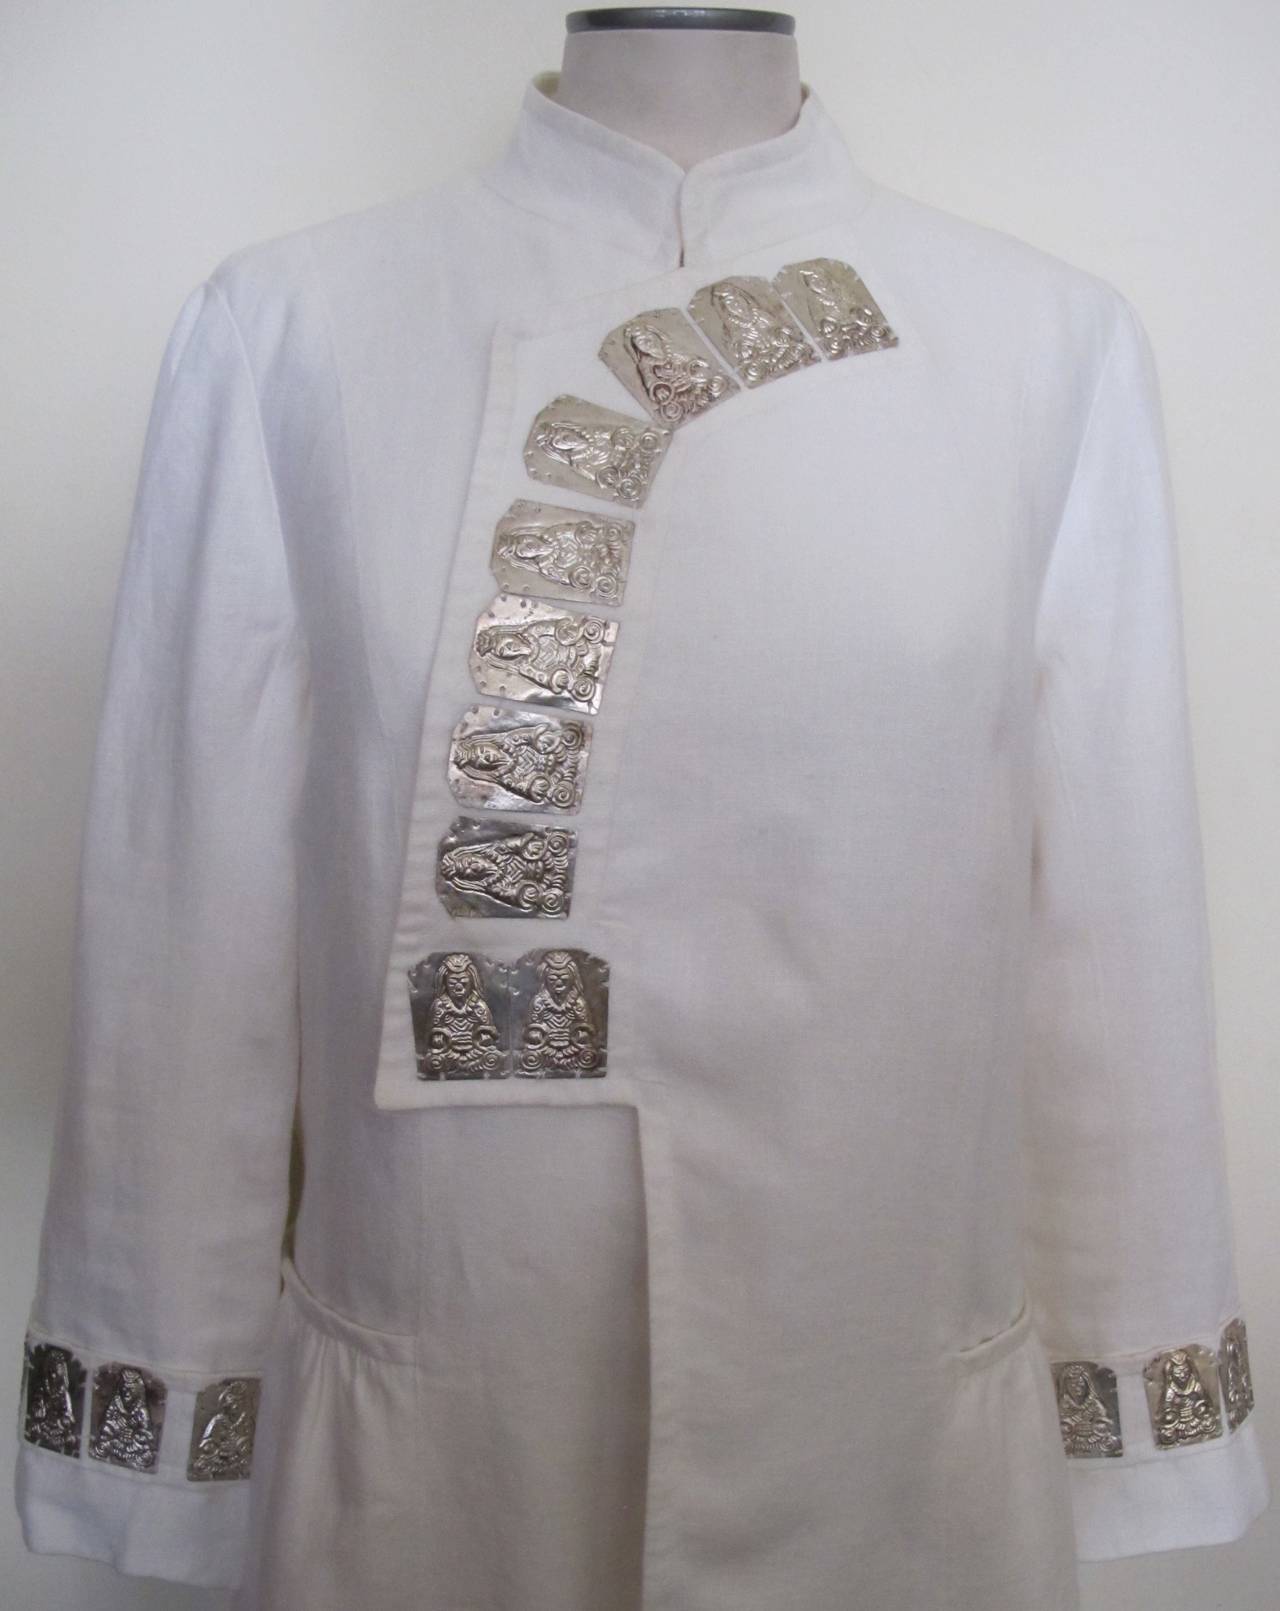 Women's Vivienne Tam 1990's White Linen Dress with Silver Buddha Medallions For Sale